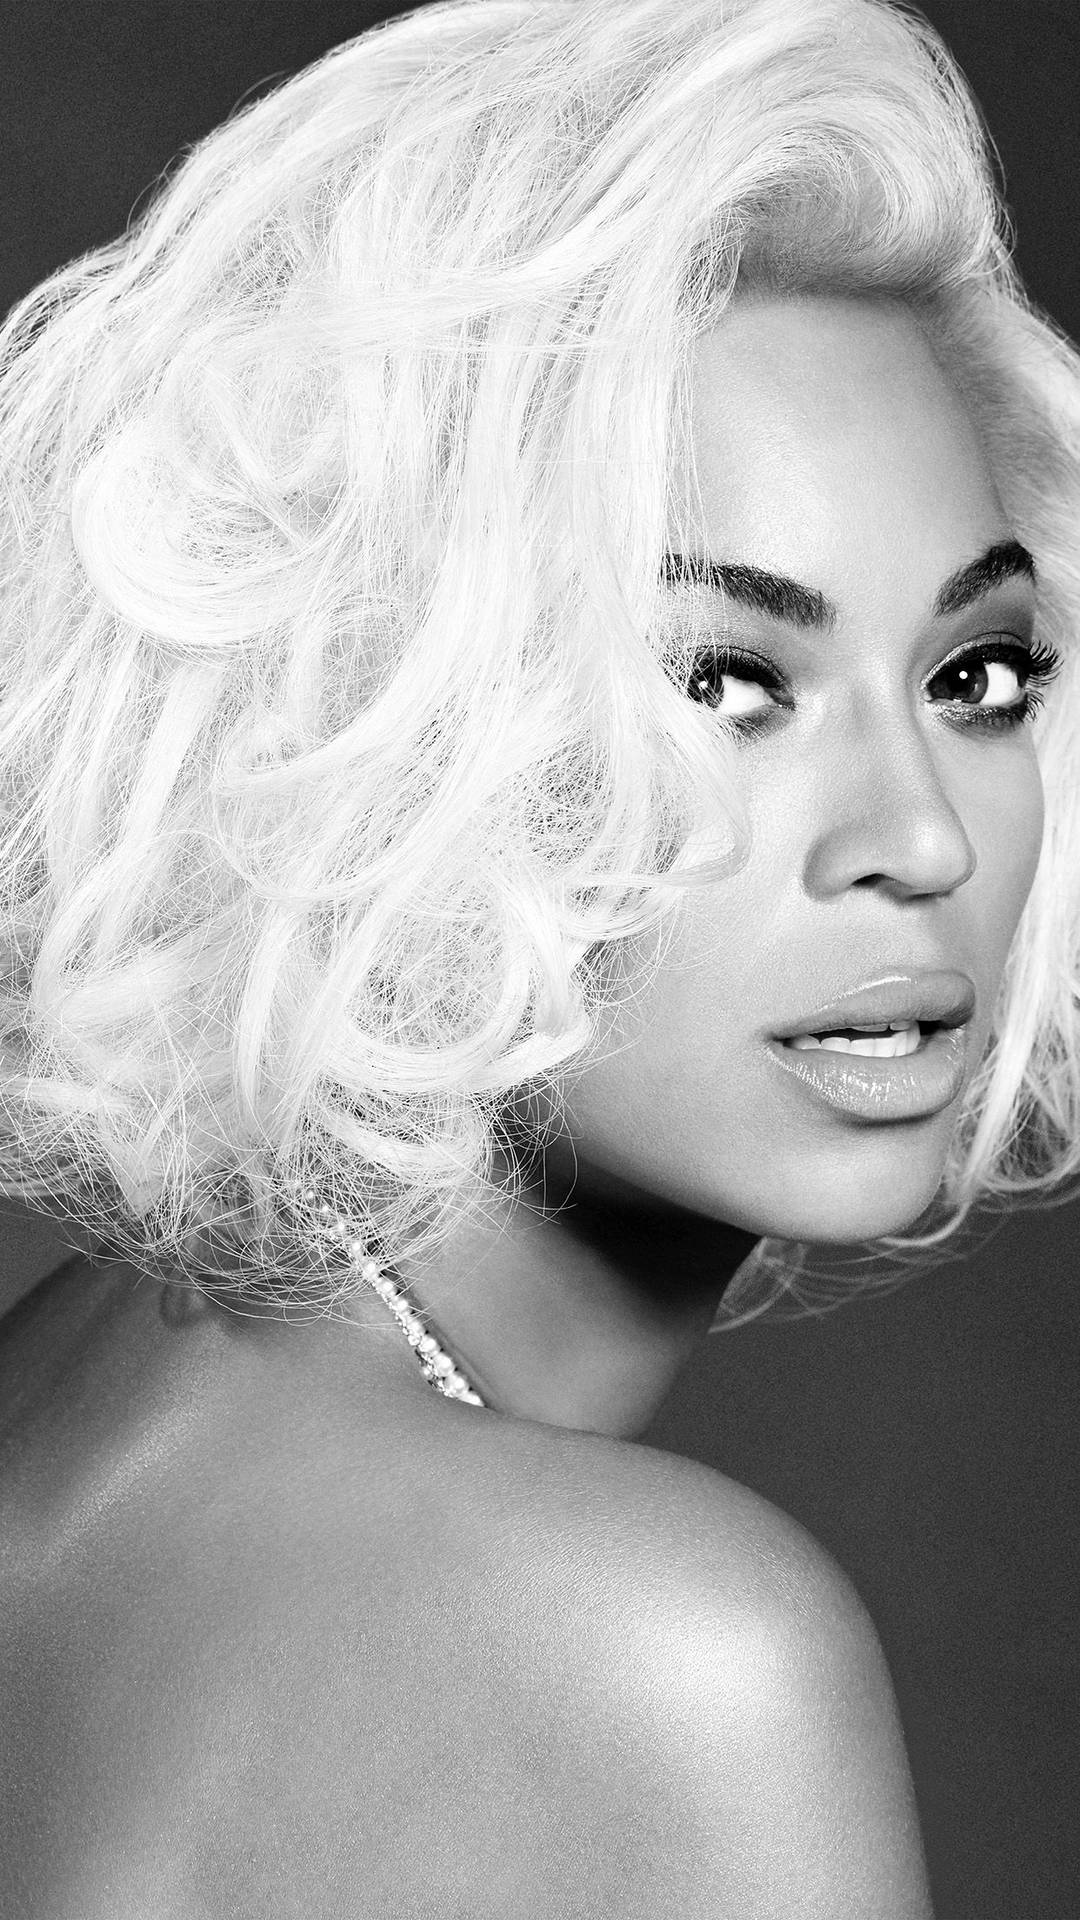 Beyonce Strikes A Pose With Her Iconic Short Bob. Background